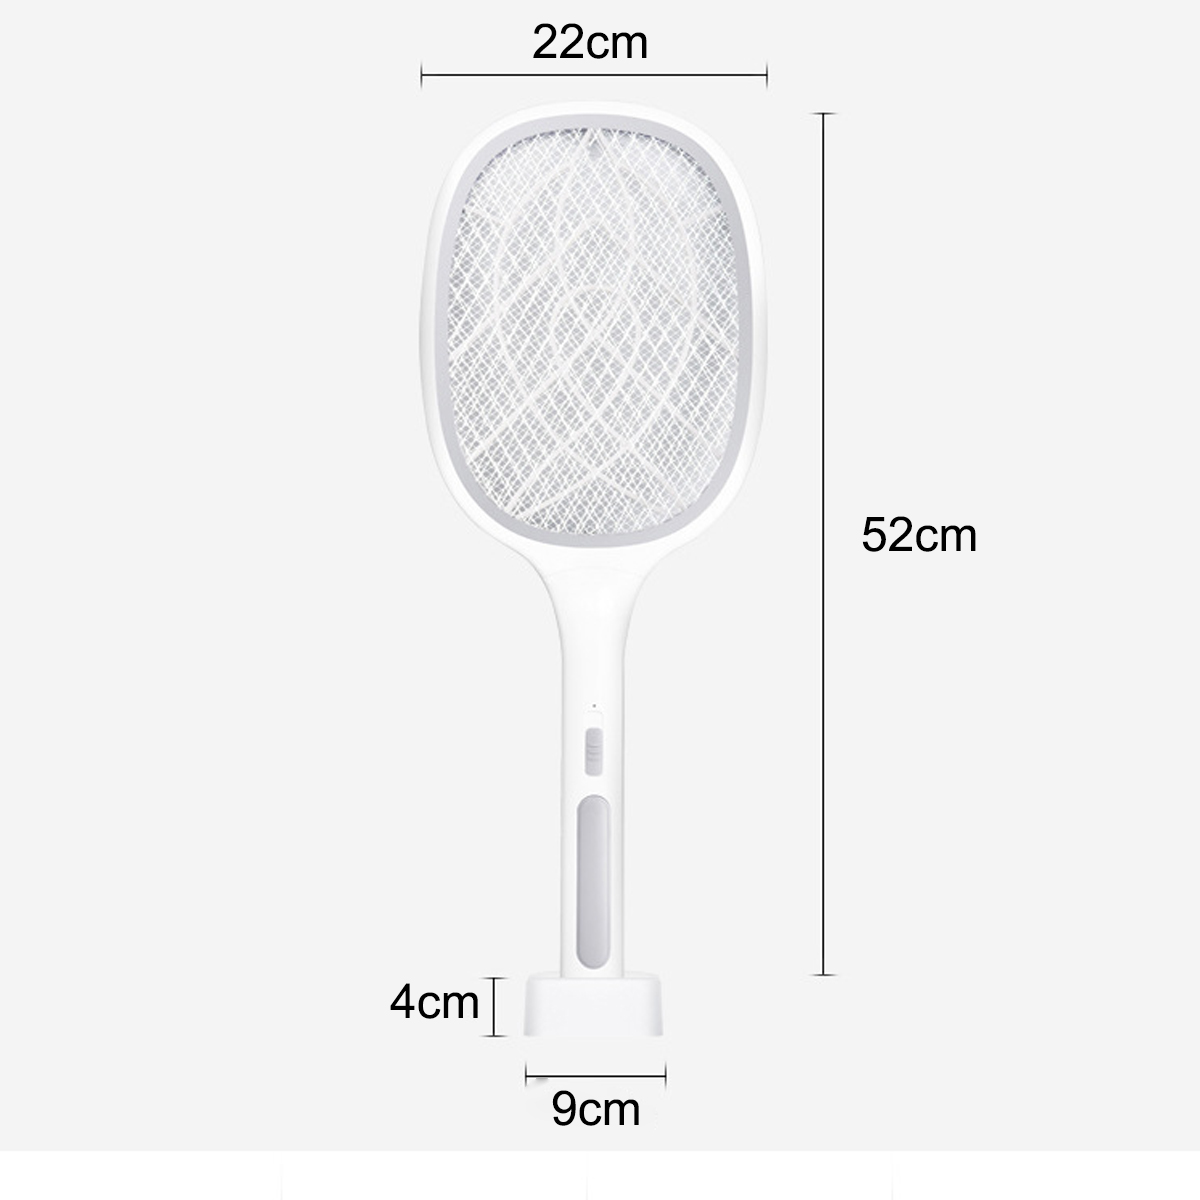 106LED-Electric-Flies-Mosquito-Swatter-3000V-Anti-Mosquito-Fly-Bug-Zapper-Racket-Rechargeable-Summer-1883413-13